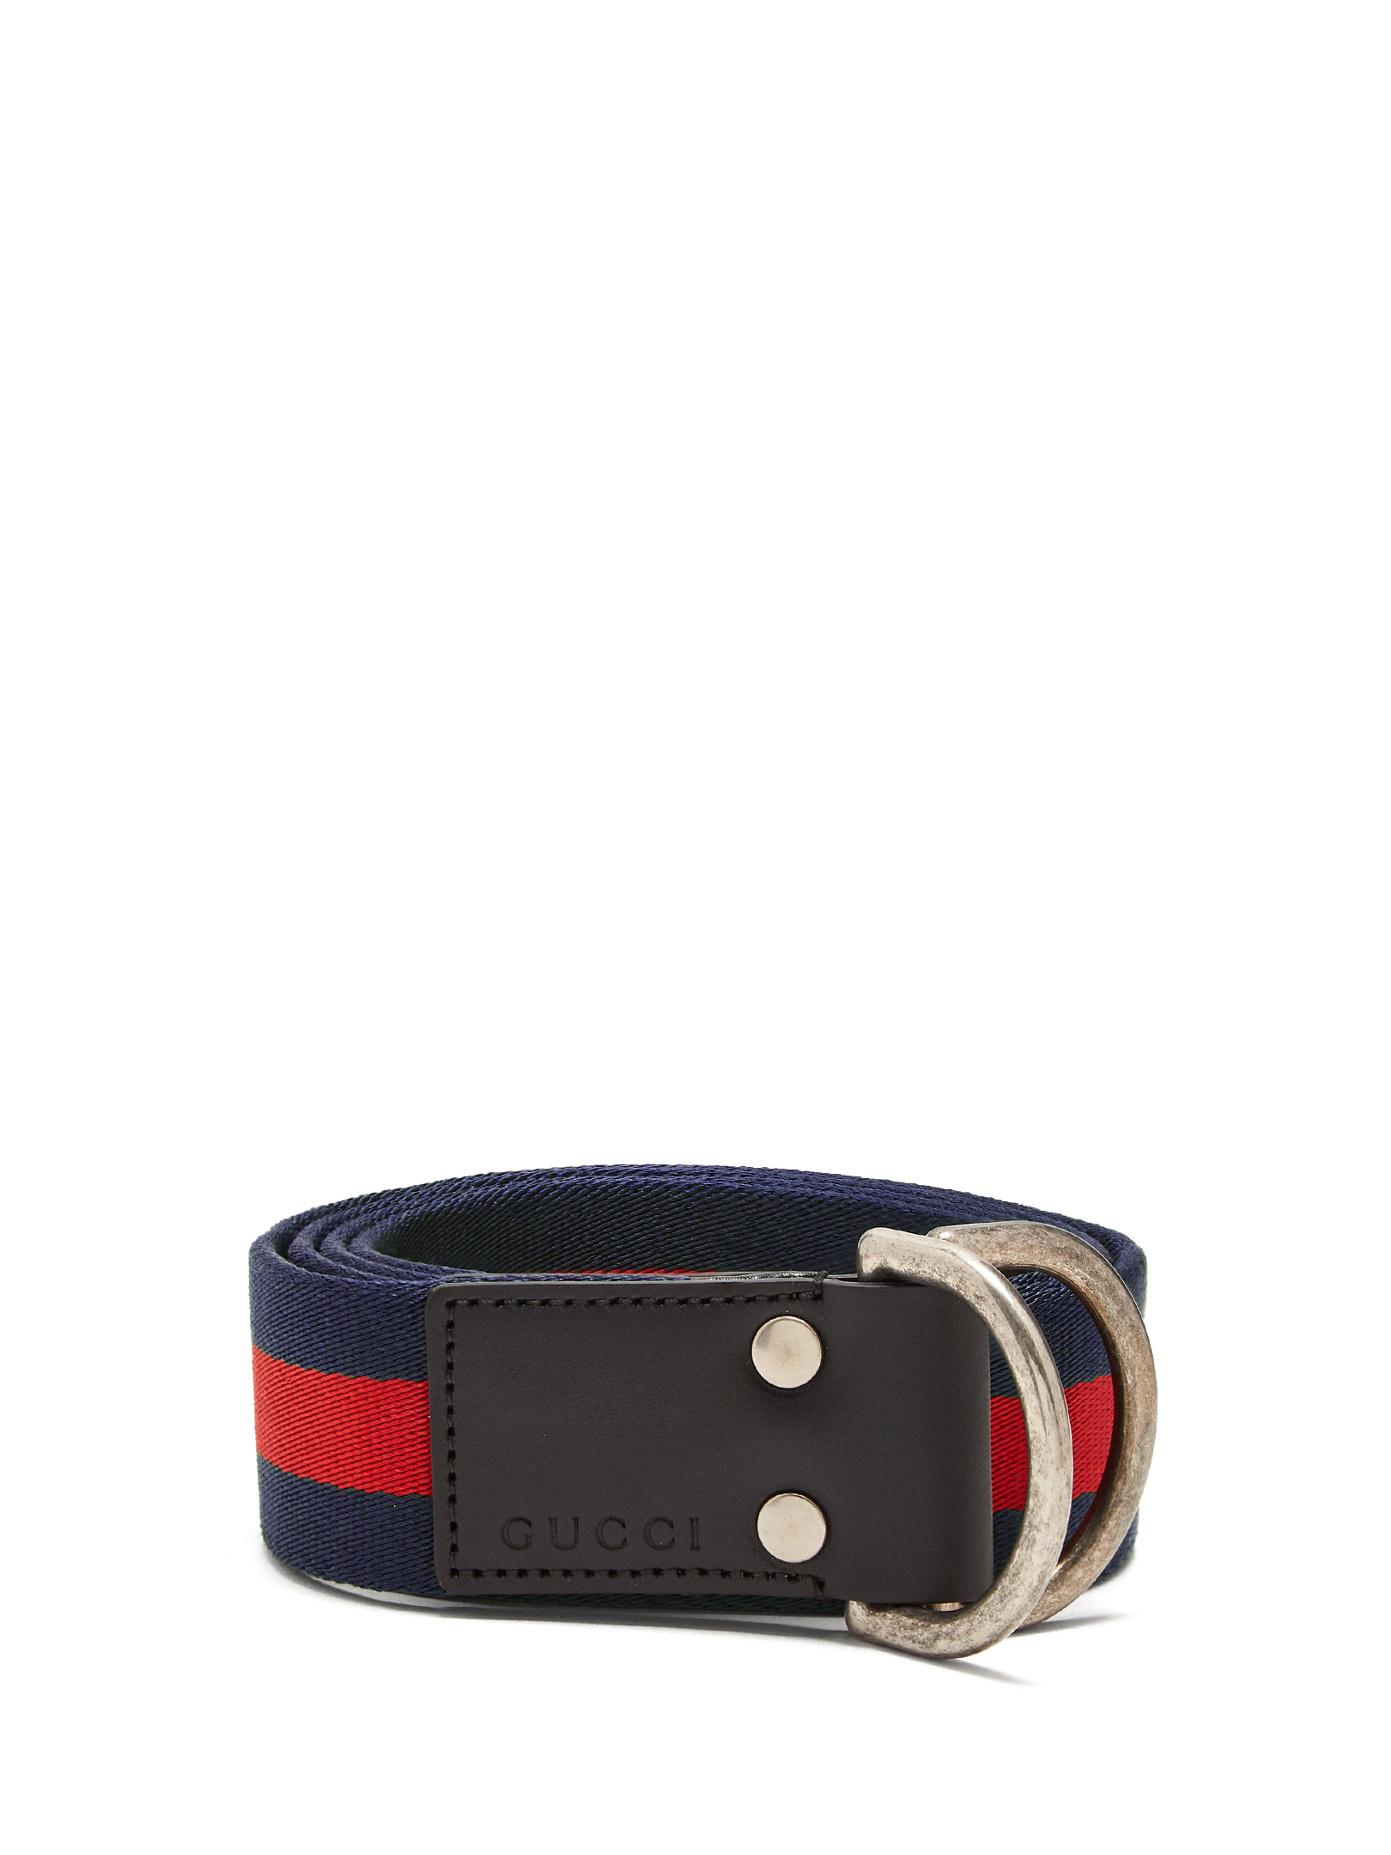 Lyst - Gucci D-ring Striped Canvas Belt in Blue for Men